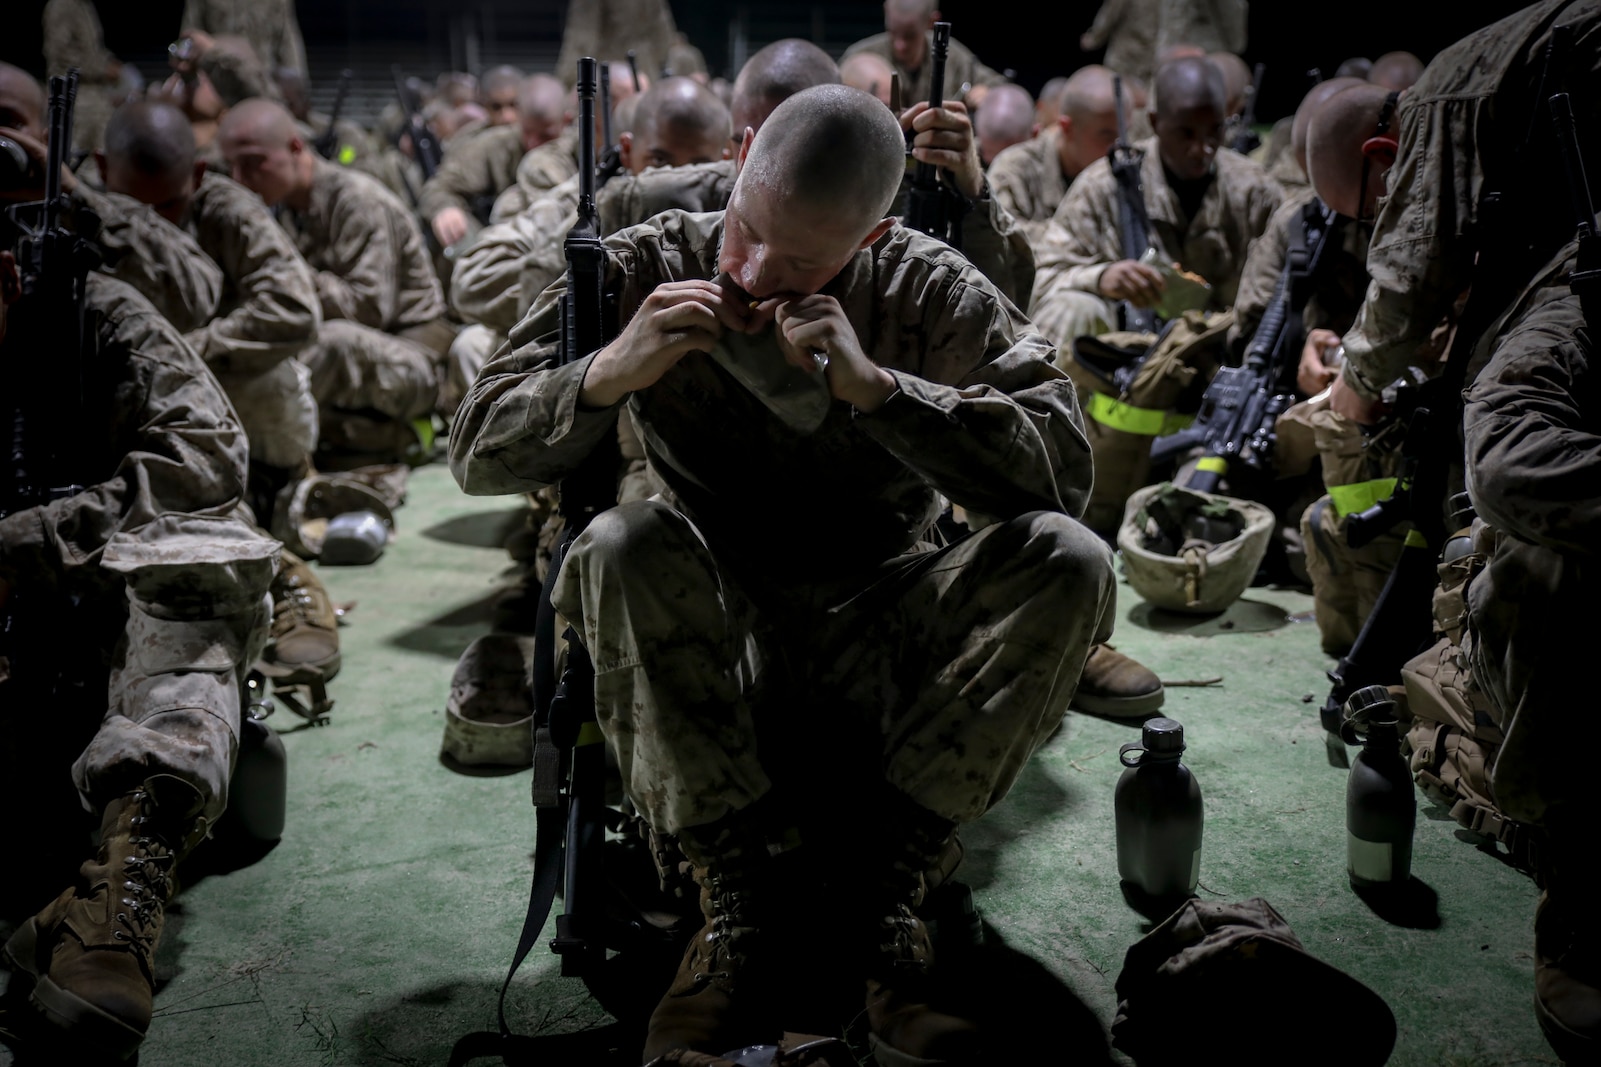 Recruits with Delta Company, 1st Recruit Training Battalion, eat a "Meal-Ready-To-Eat" during the Crucible on Marine Corps Recruit Depot Parris Island, S.C., Sept. 27, 2018. The Crucible is a 54-hour culminating event that requires recruits to work as a team and overcome challenges in order to earn the title United States Marine. (U.S. Marine Corps photo by Lance Cpl. Shane T. Manson)